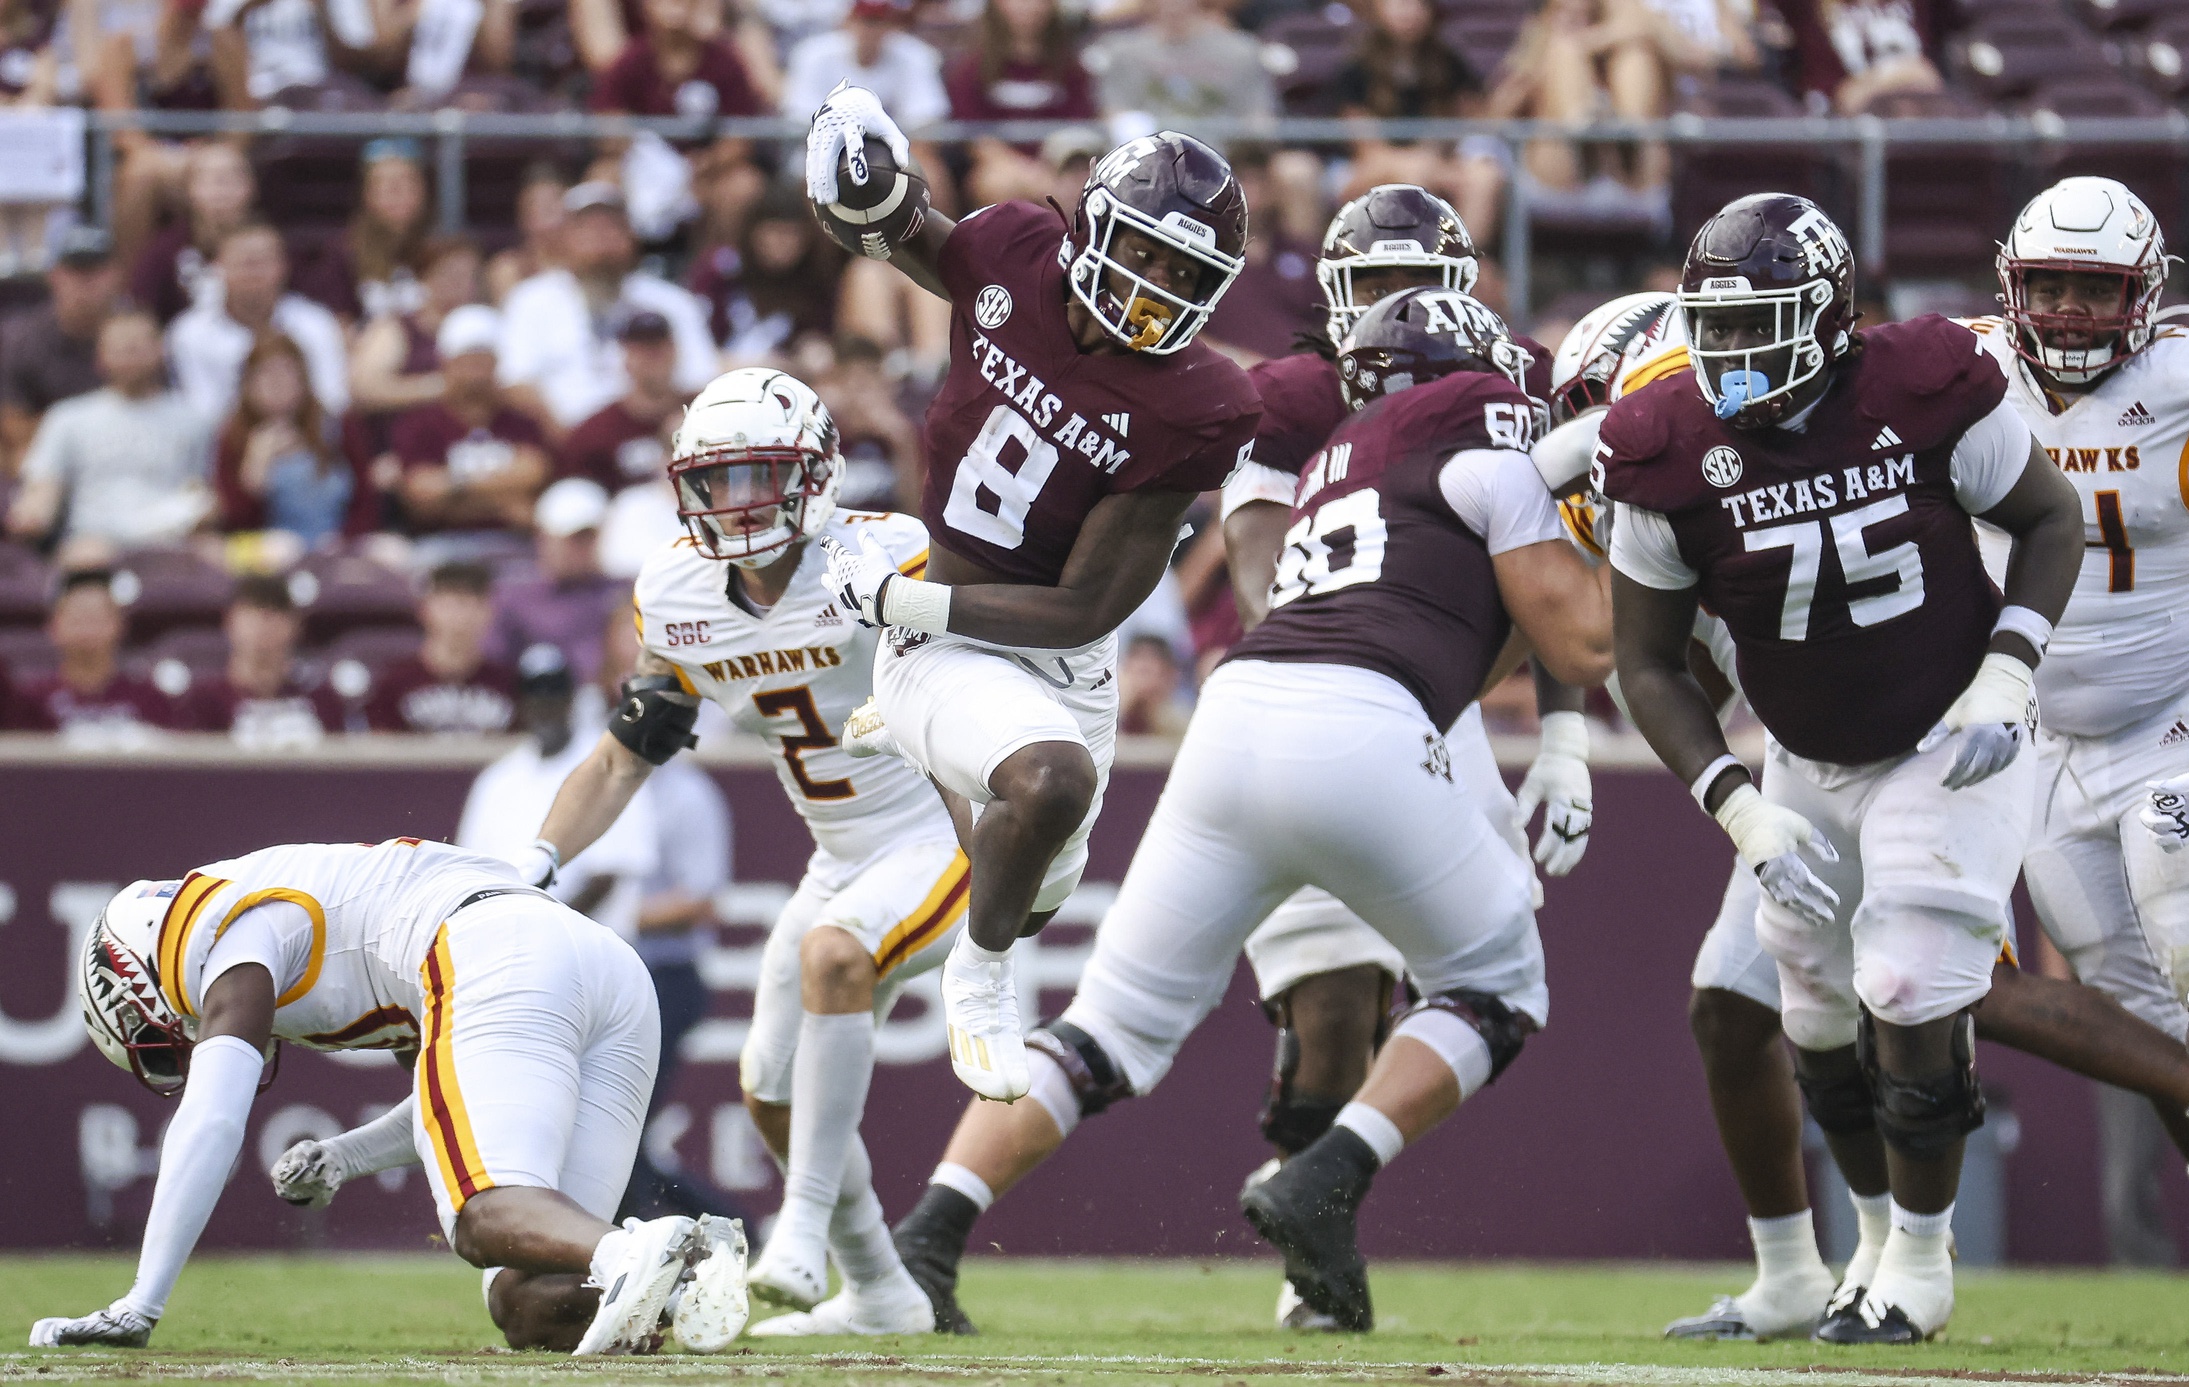 Five Texas A&M Aggies will play in NFL Pro Bowl on Sunday - Good